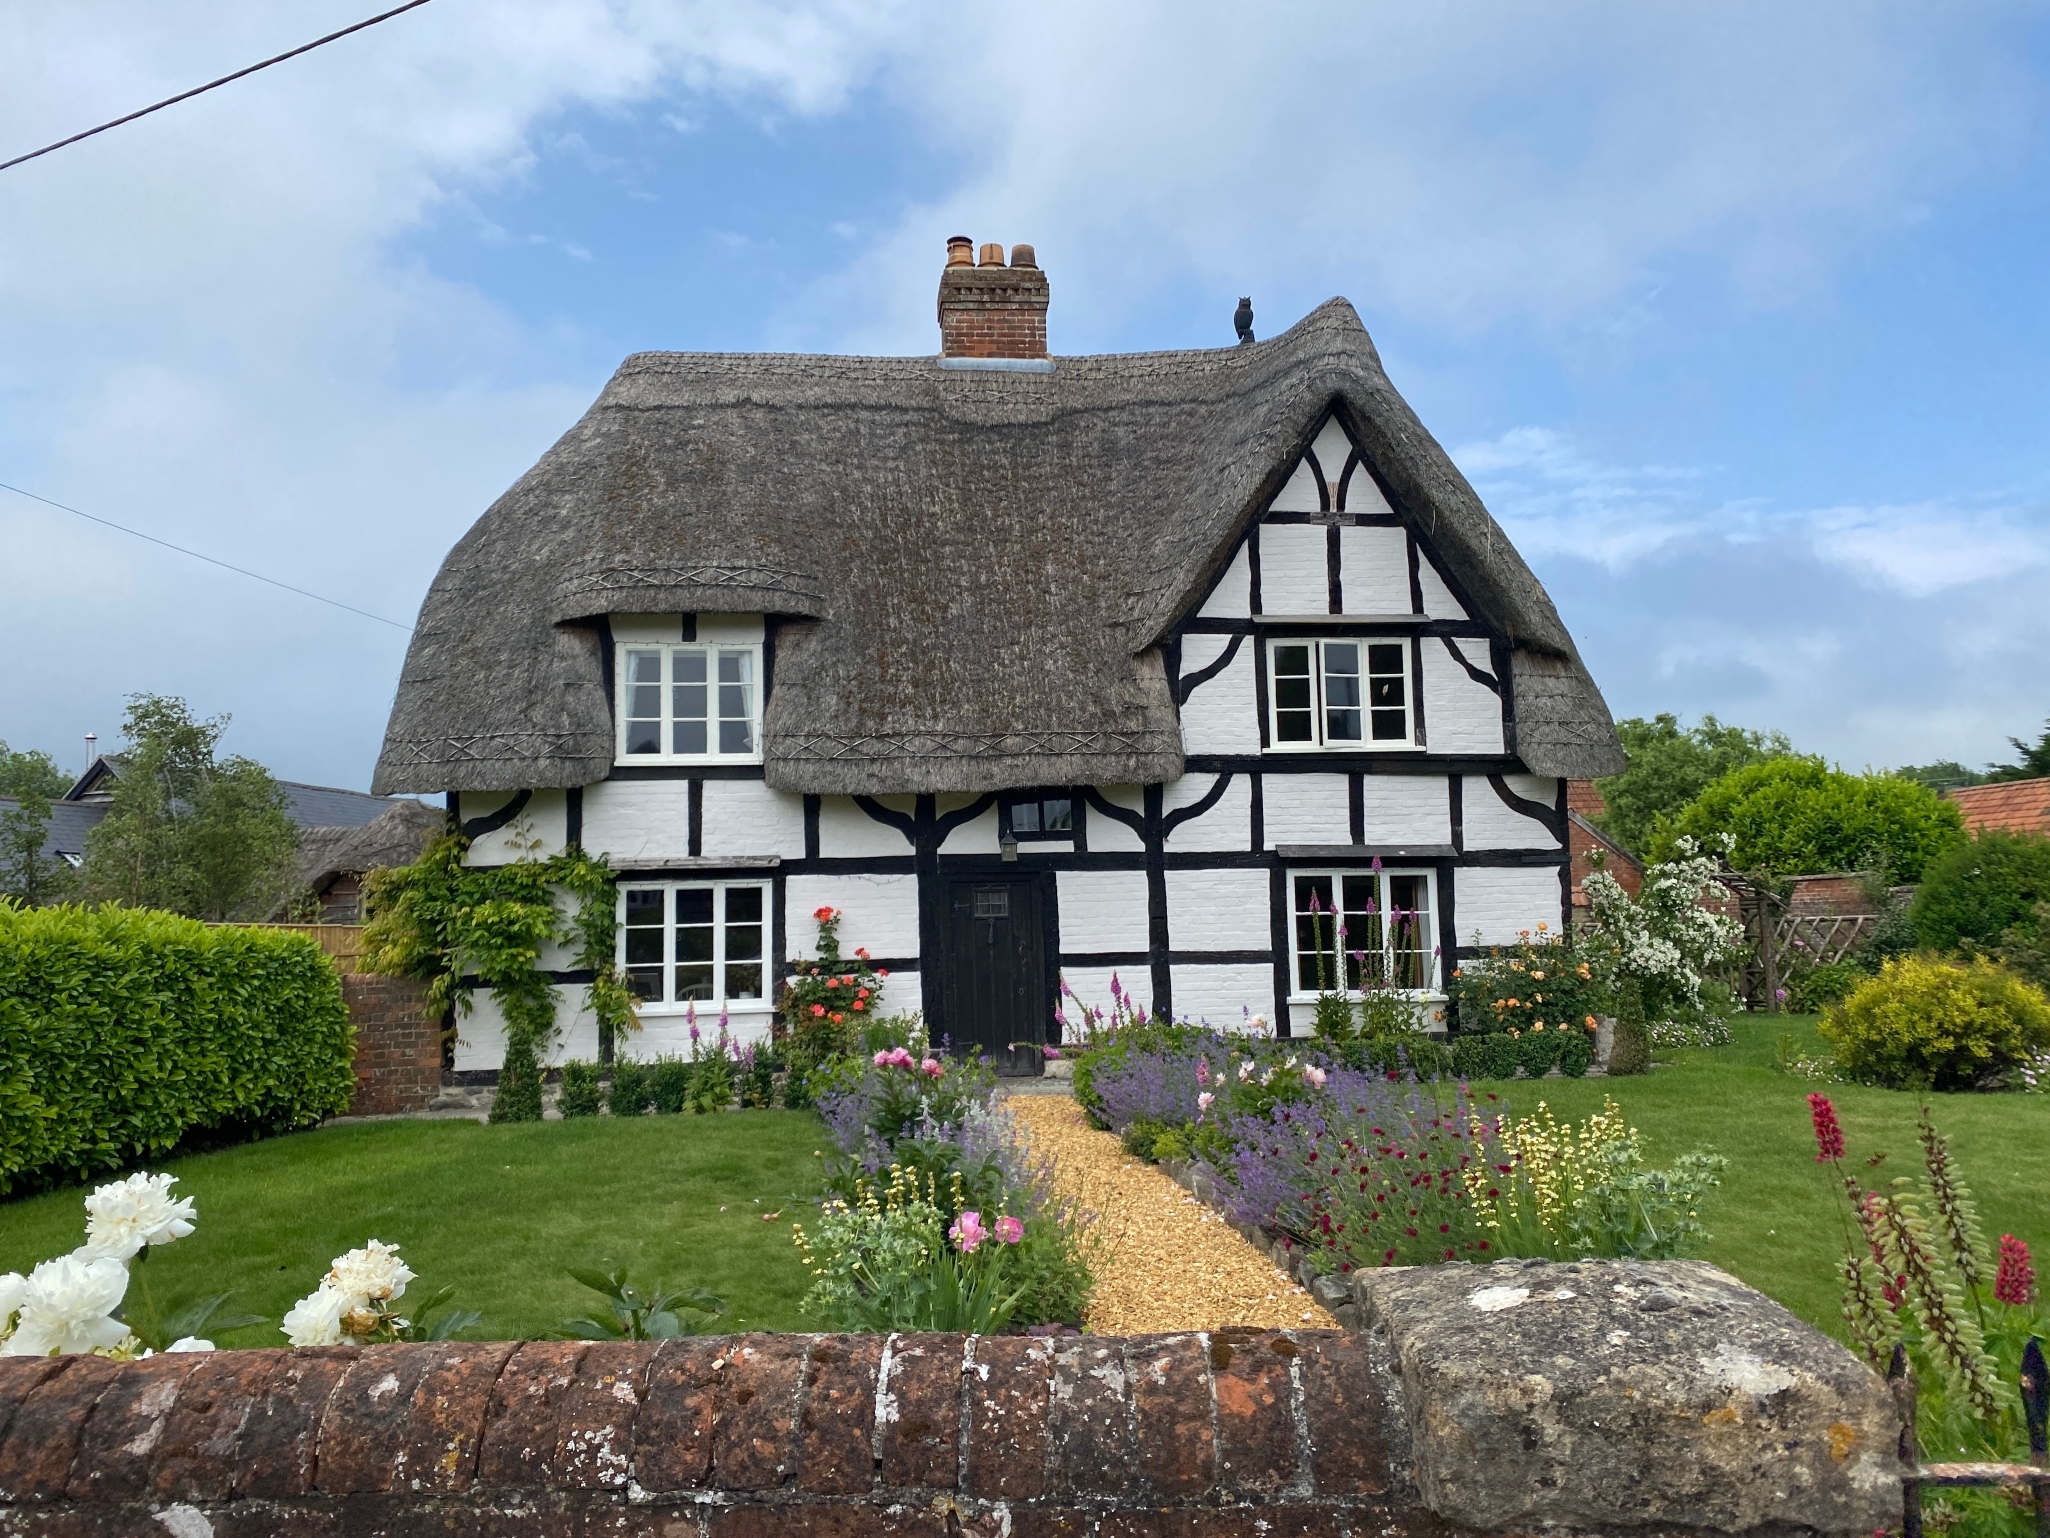 Thatched roof home in Somerset